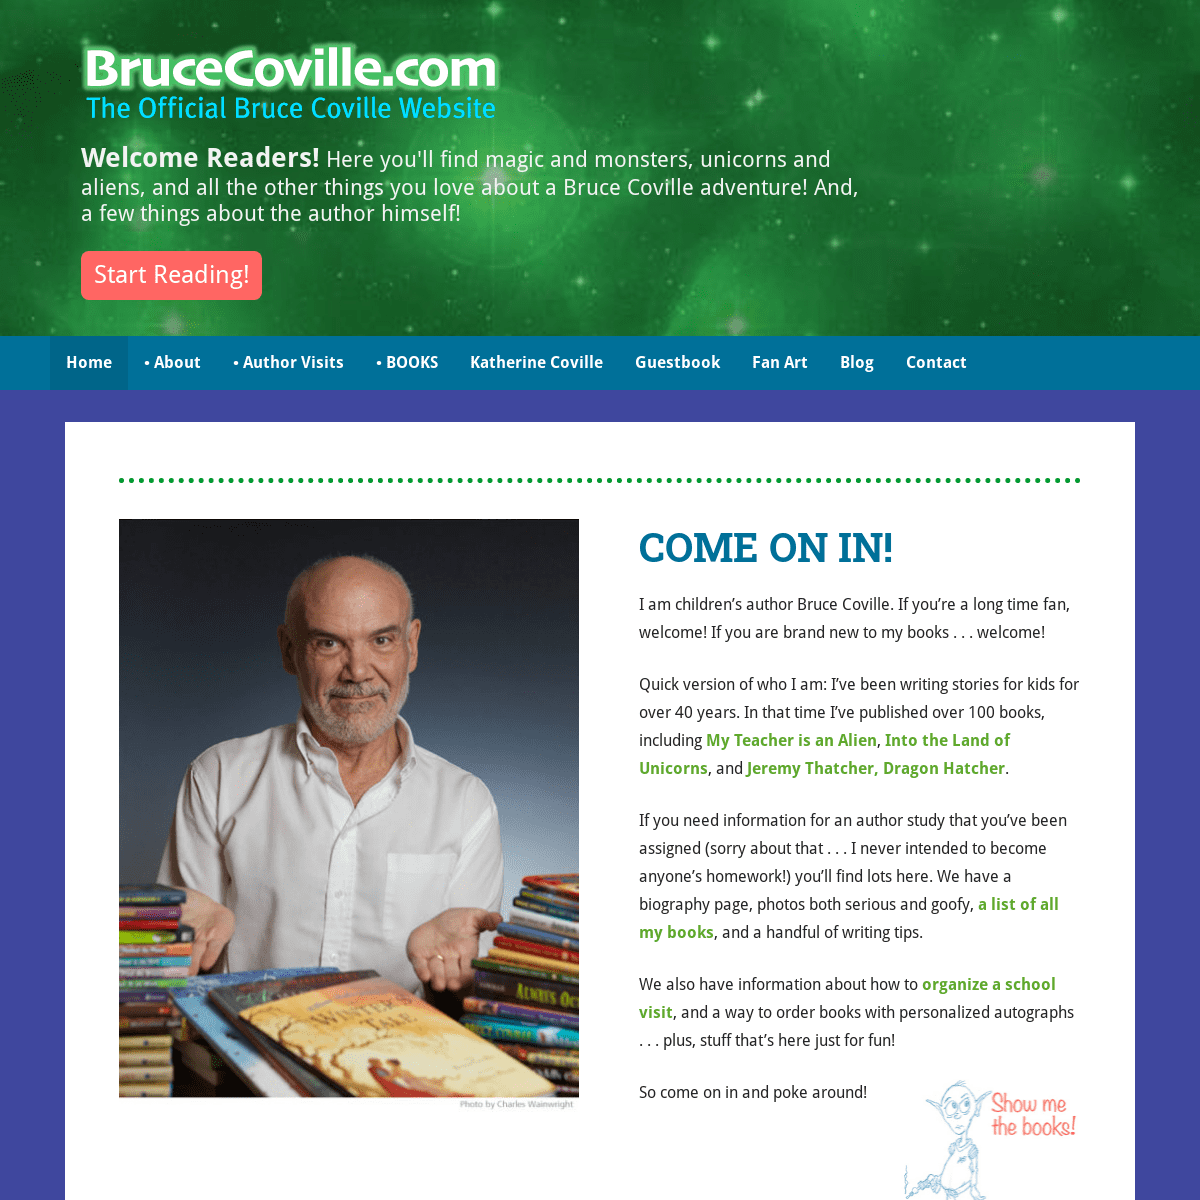 A complete backup of https://brucecoville.com